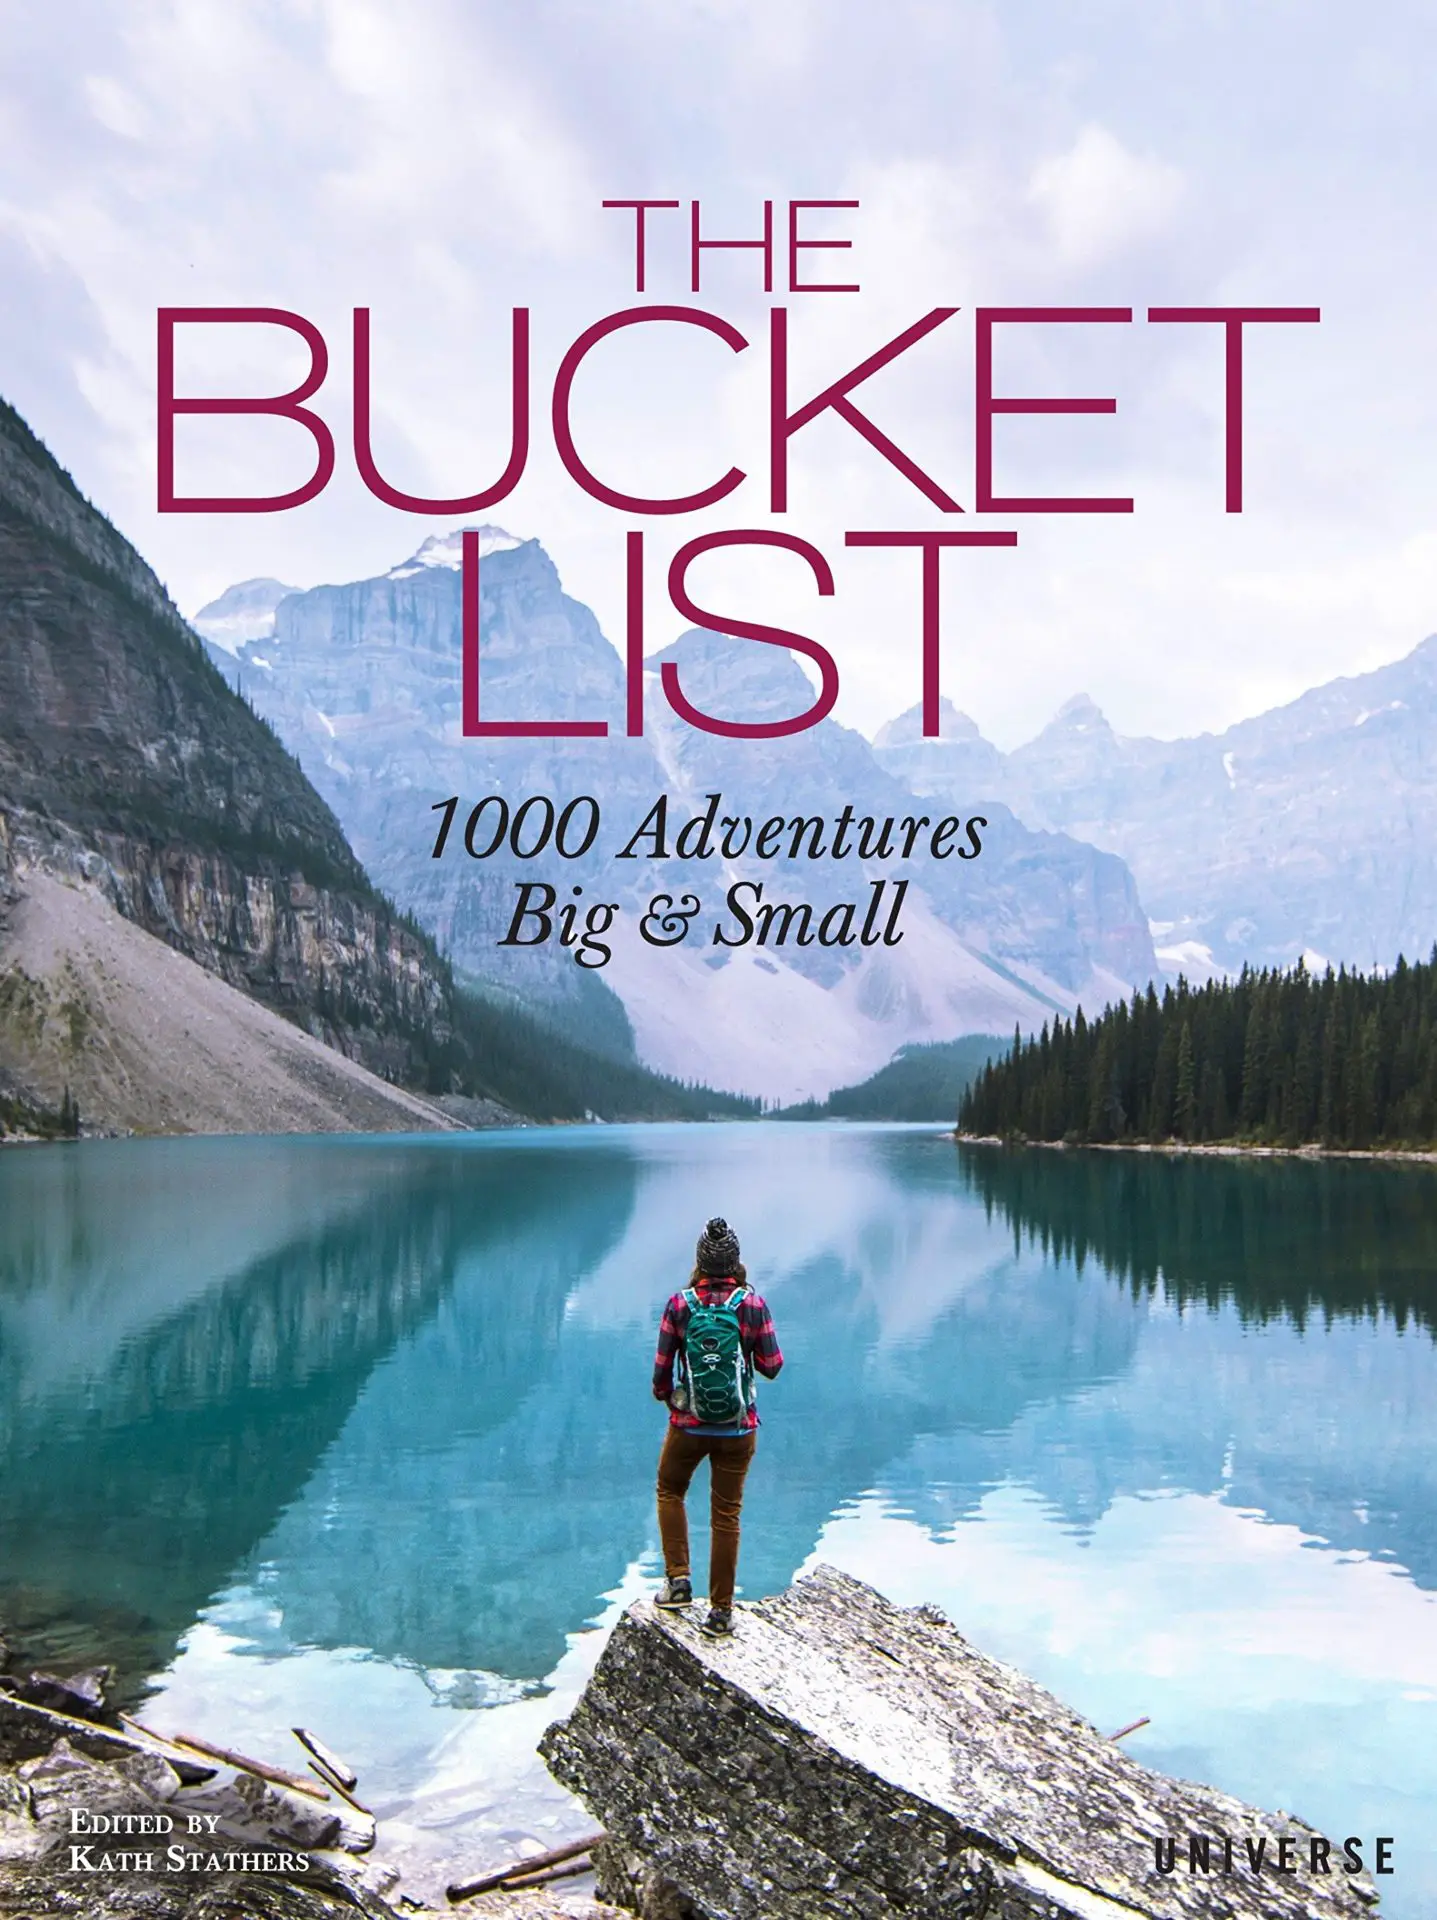 the 1000 adventures book for valentine's day gift ideas